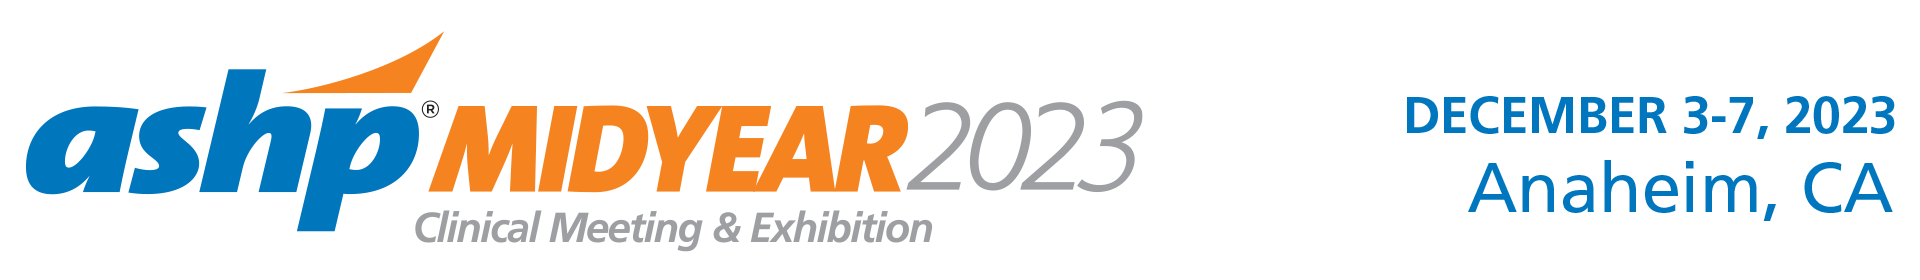 2023 Midyear Clinical Meeting & Exhibition Event Banner